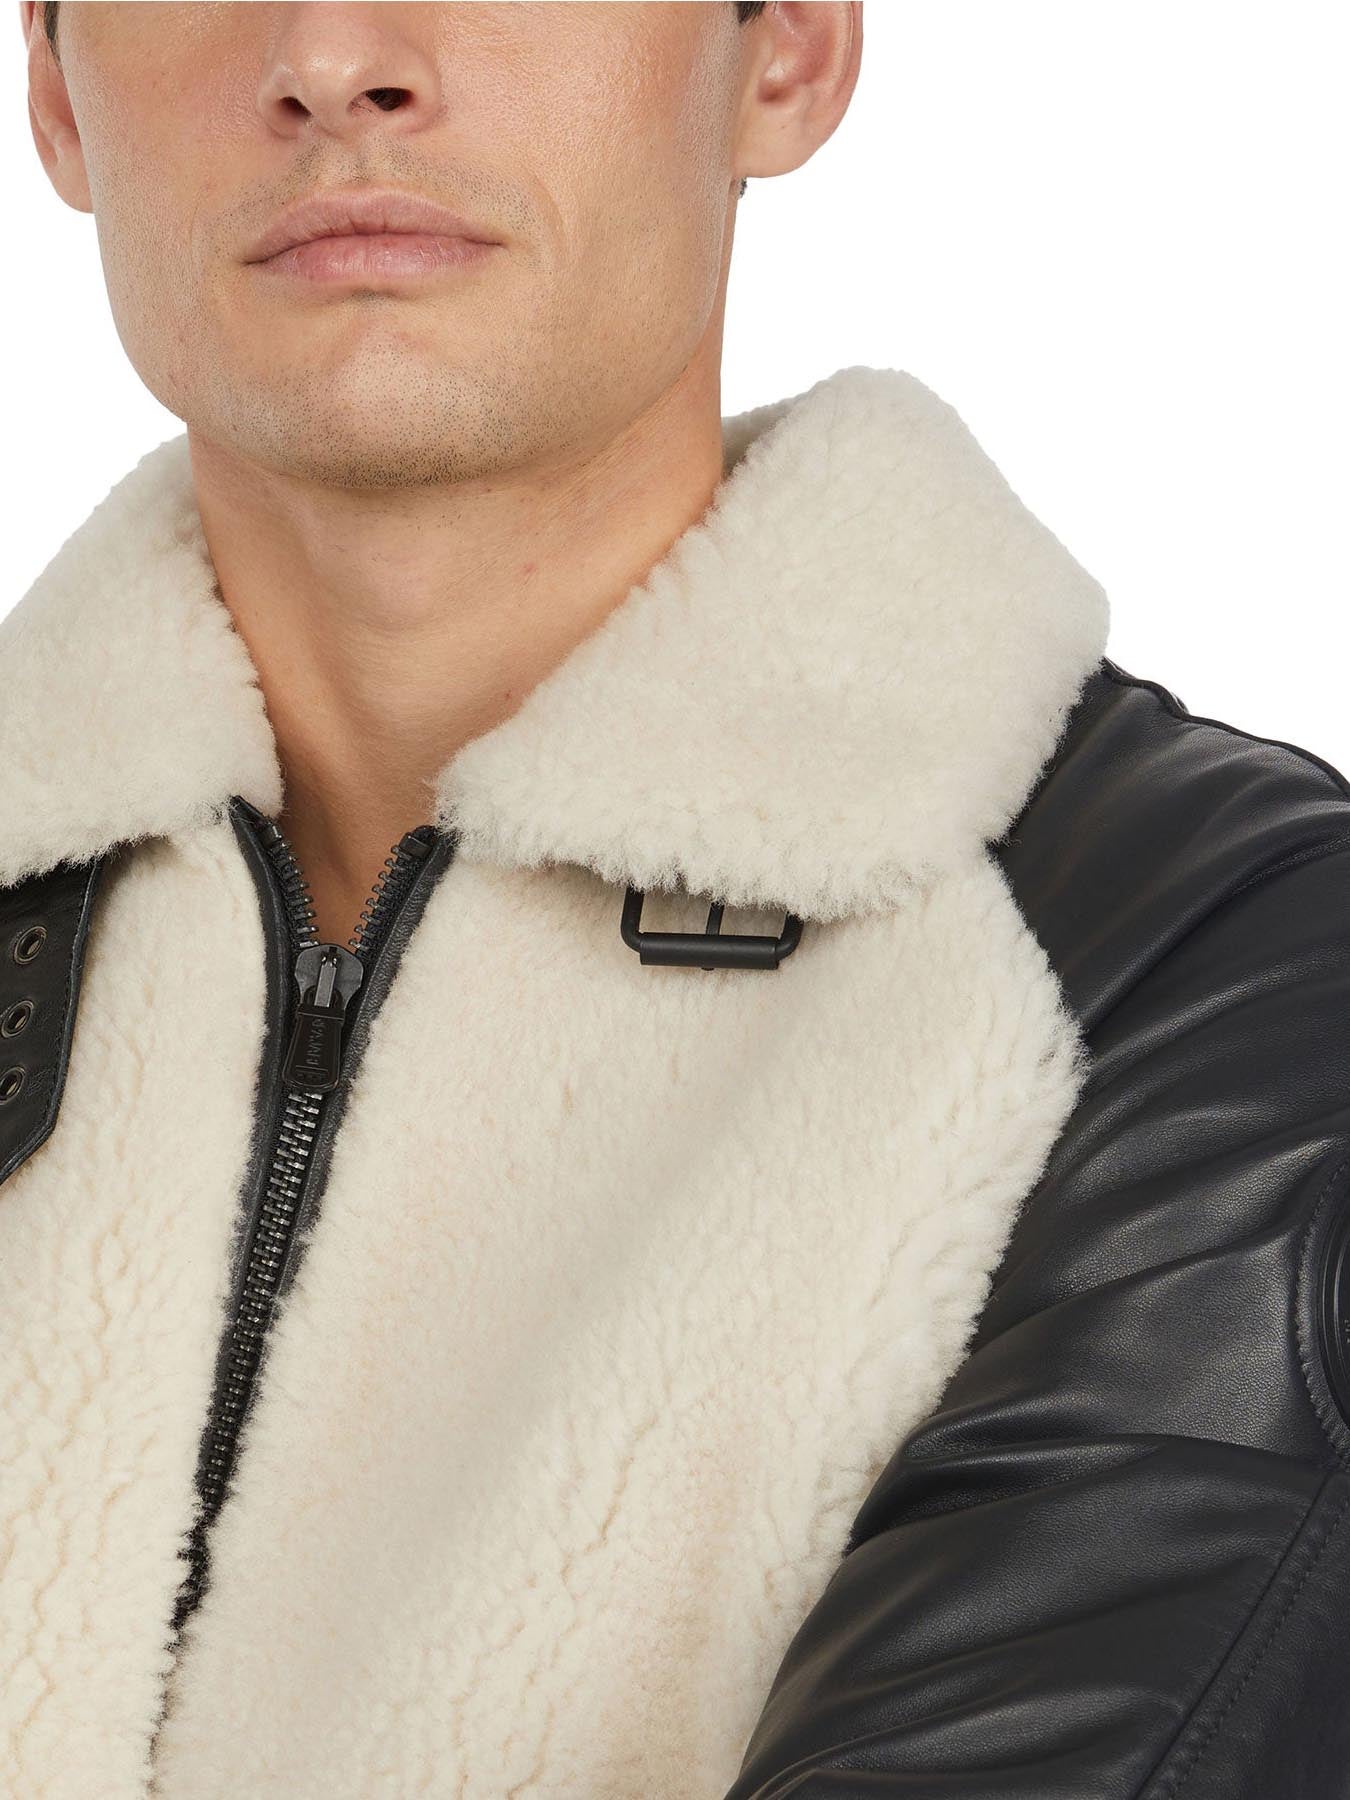 Campbell Men's Shearling and Leather Varsity Jacket